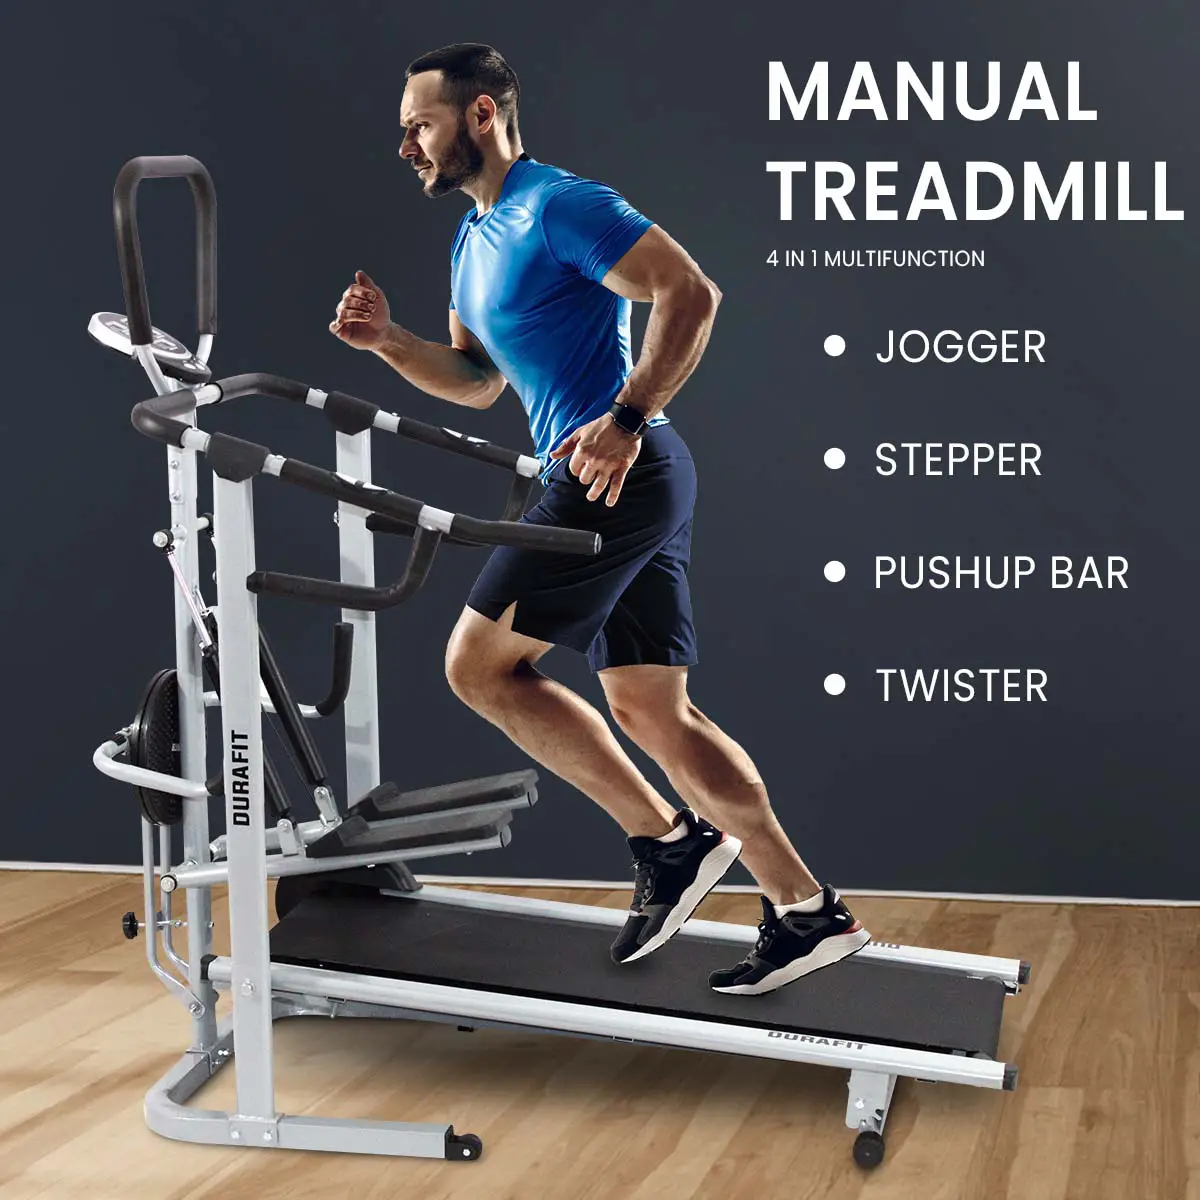 Durafit Manual Treadmill Hmtm1 with 4 in 1 multifunction